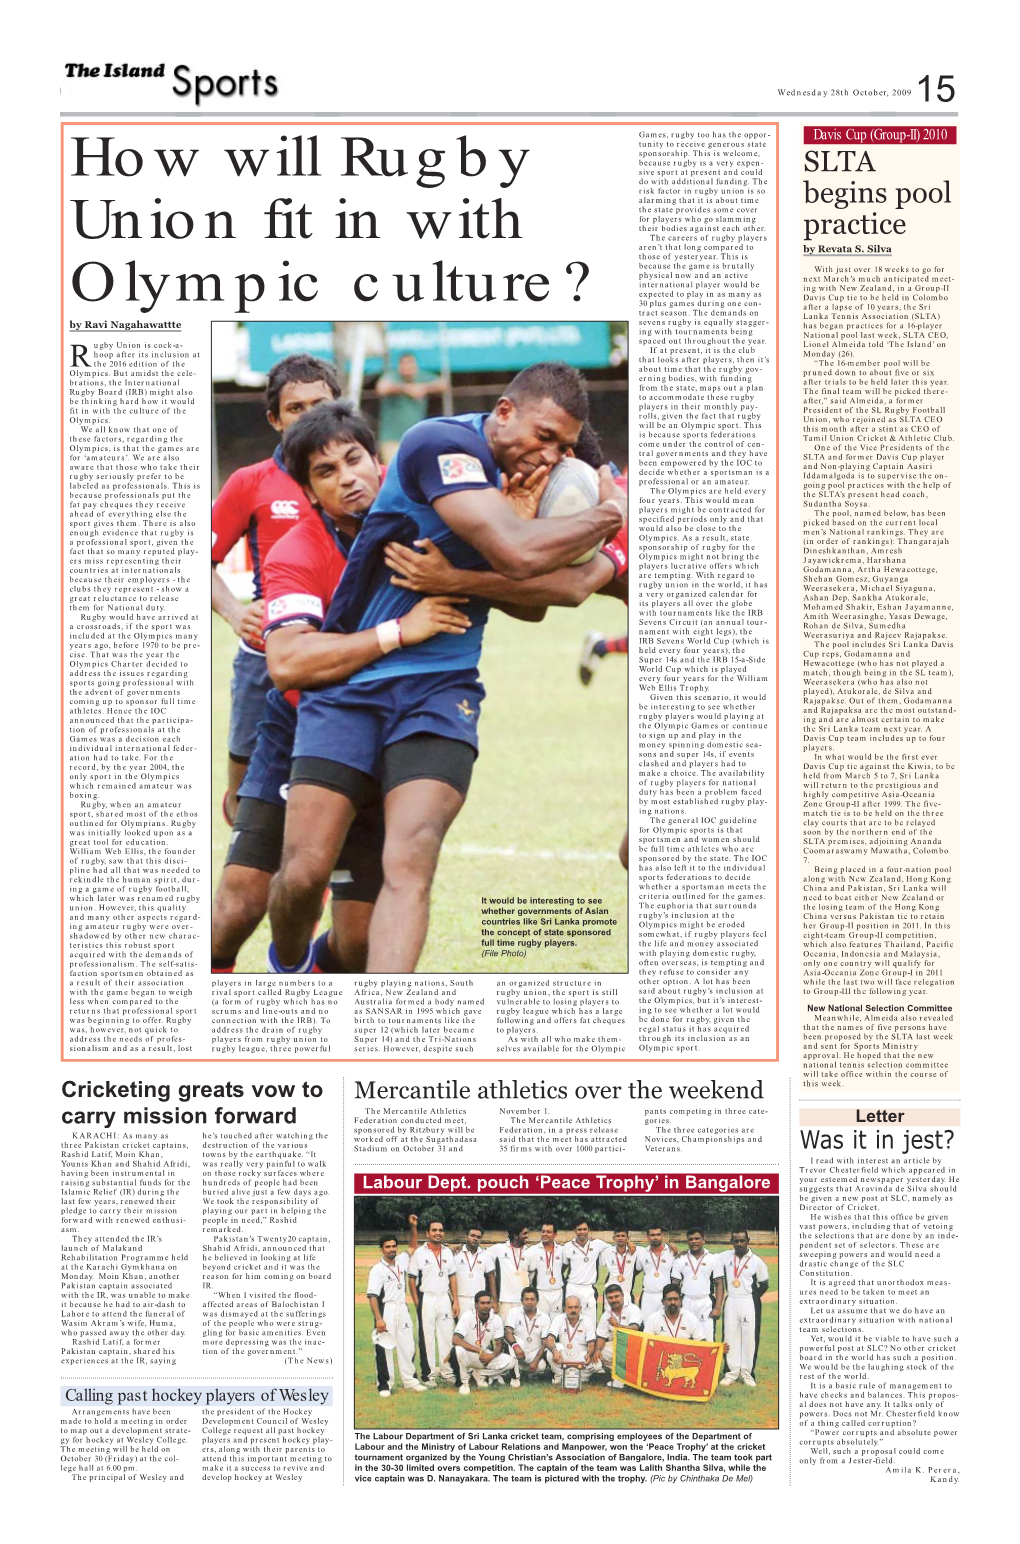 How Will Rugby Union Fit in with Olympic Culture?